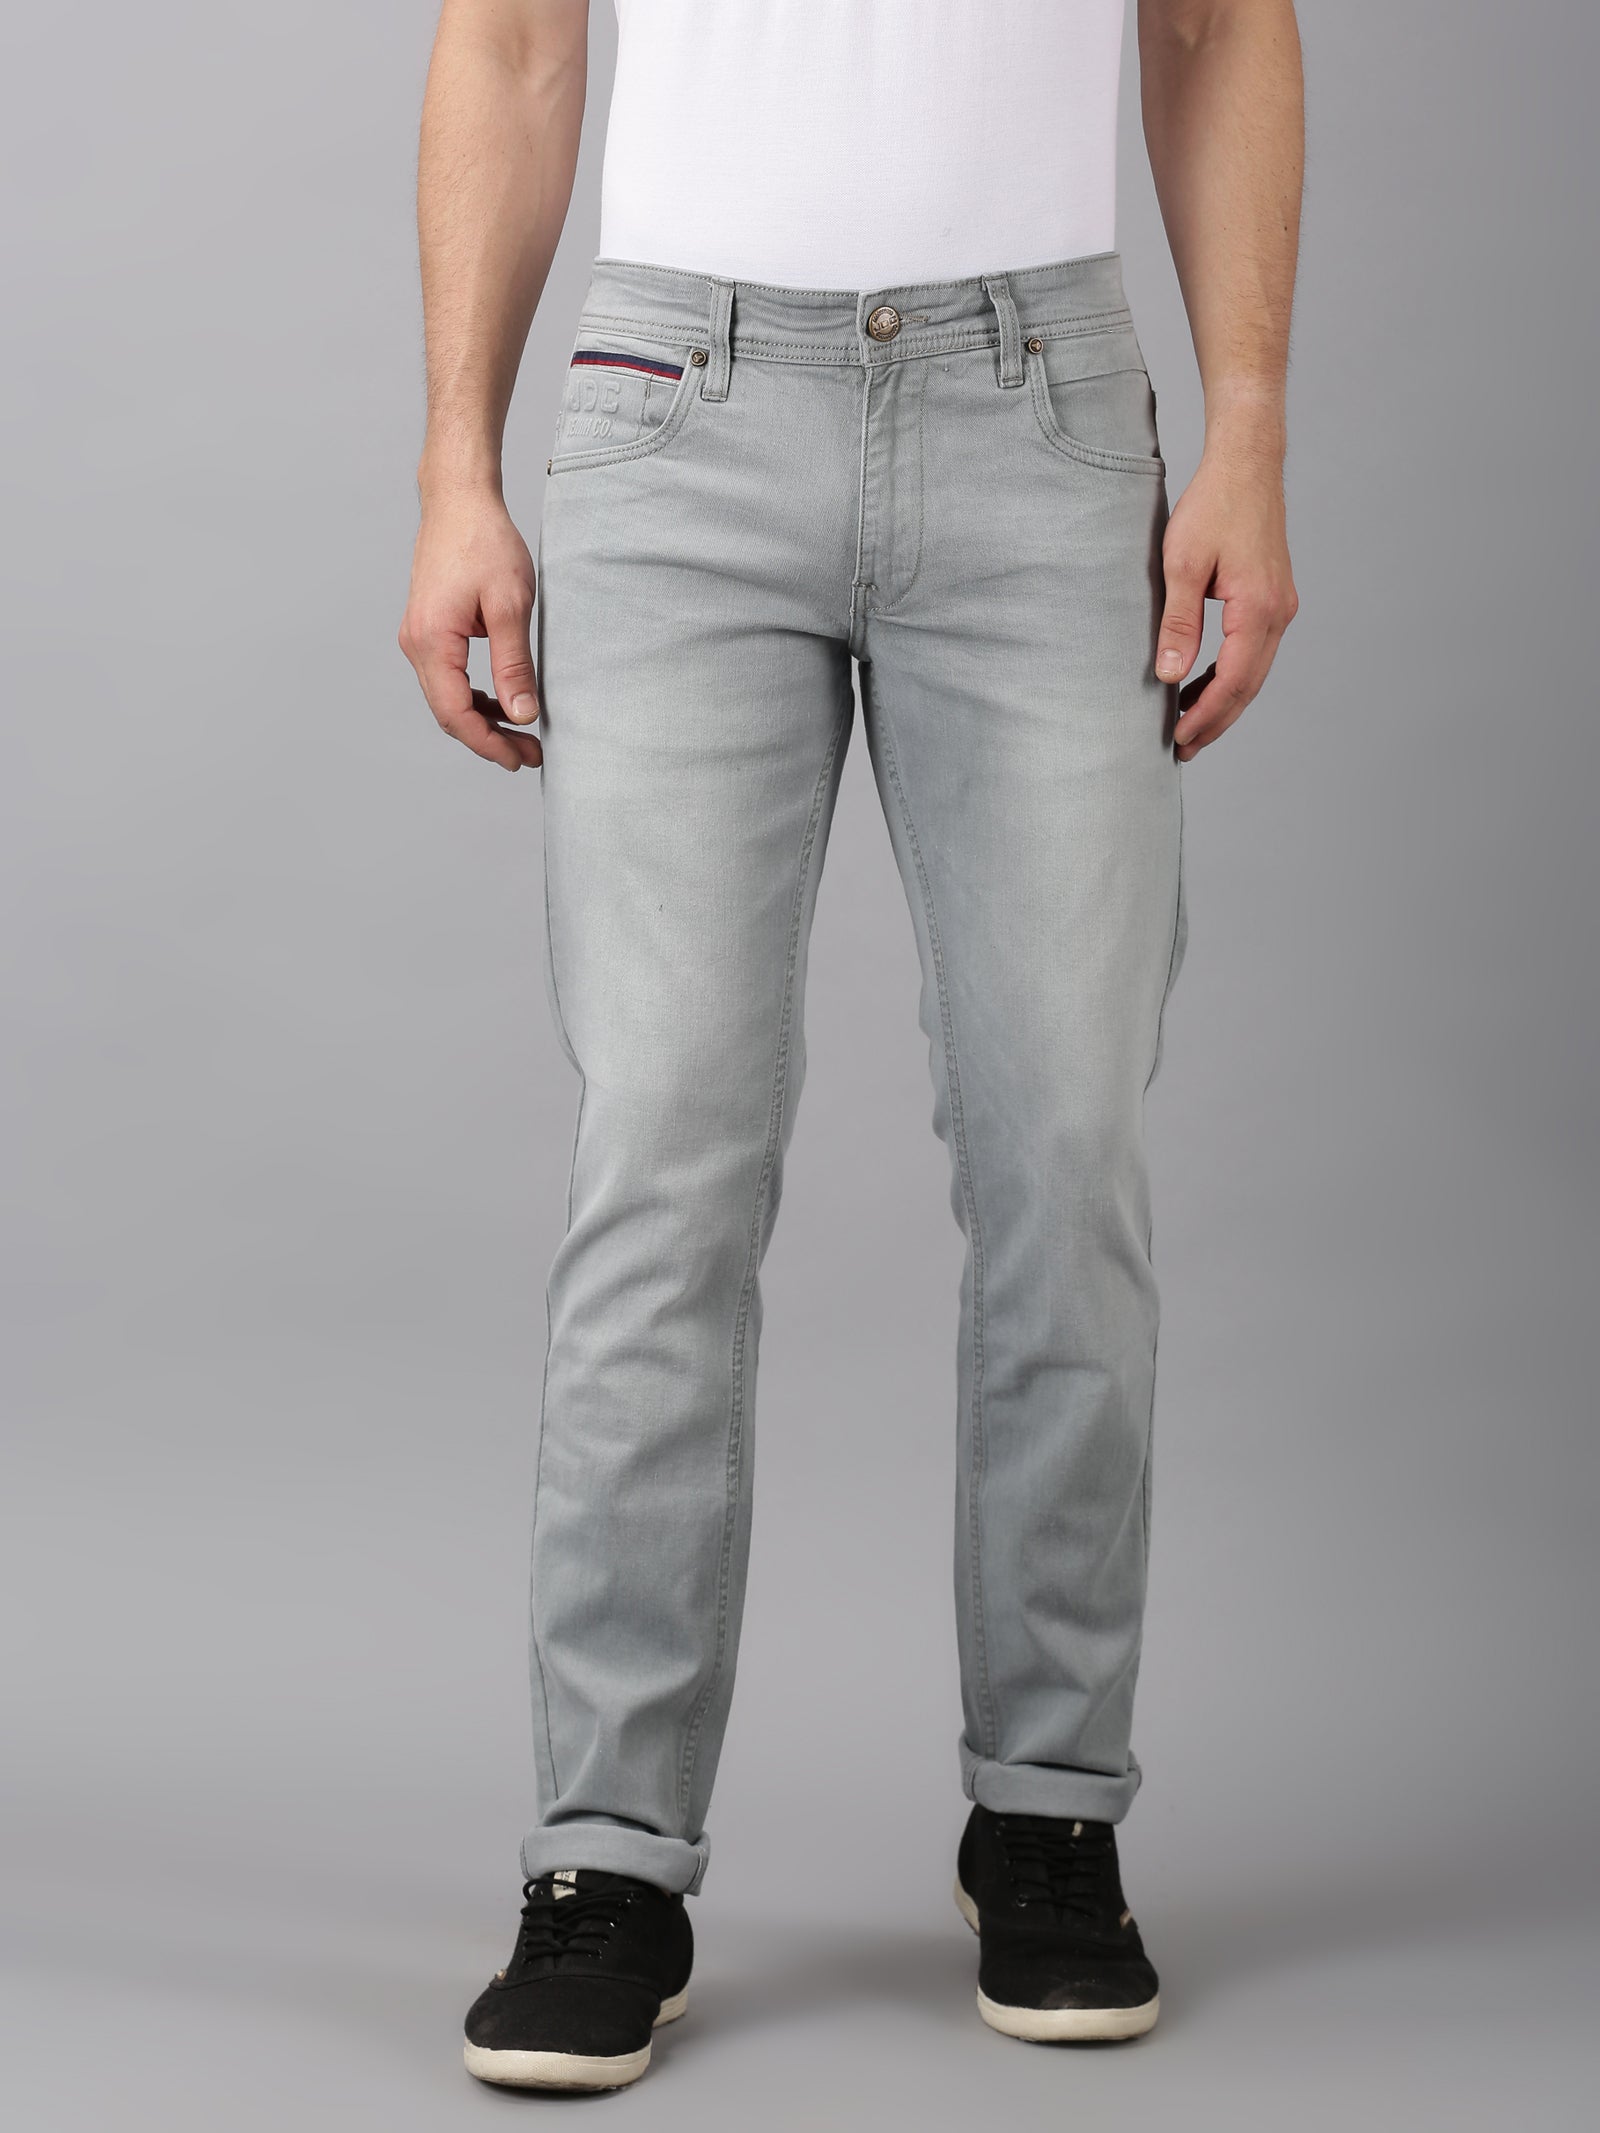 MEN'S LIGHT GREY FADED WASH SLIM FIT JEANS – JDC Store Online Shopping